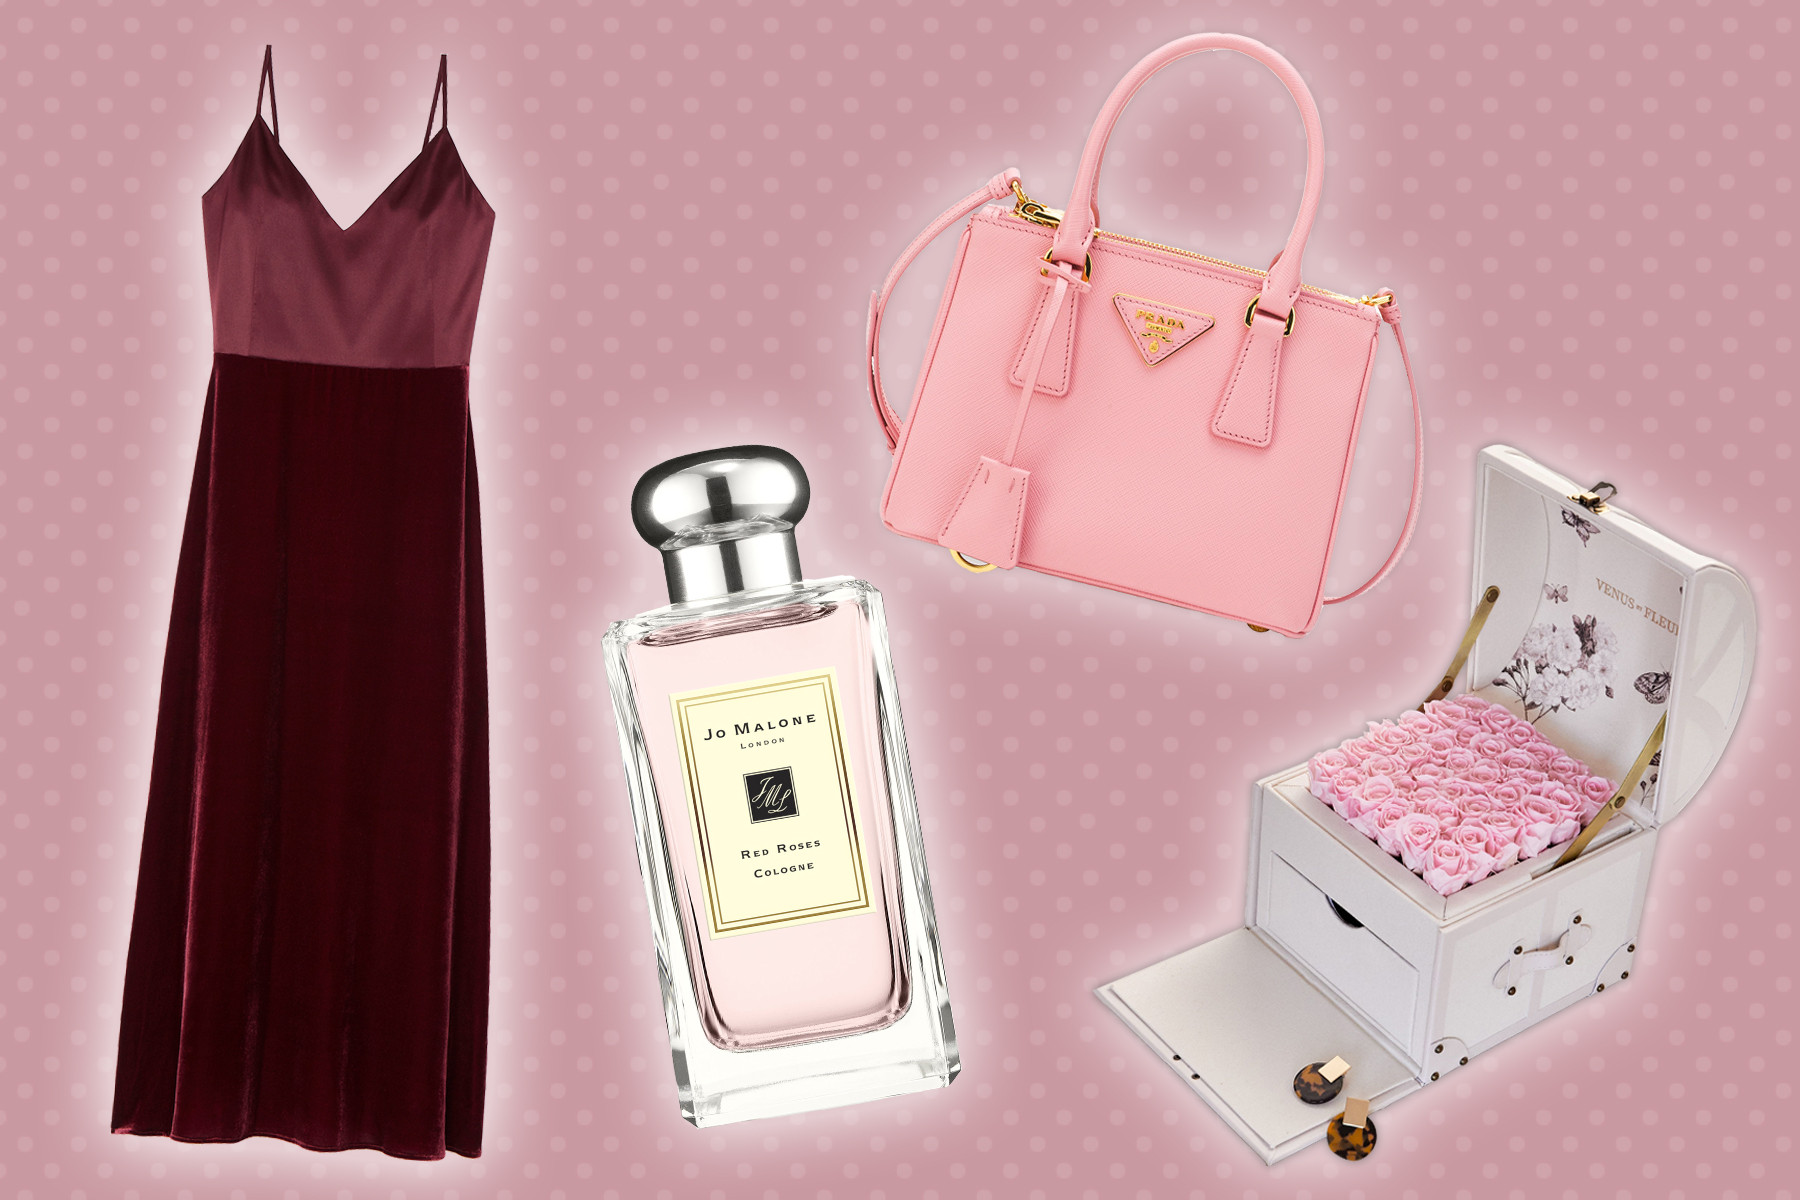 Gift Ideas For Her Valentines
 Best Valentine’s Day Gift Ideas for Her What to Get Chic